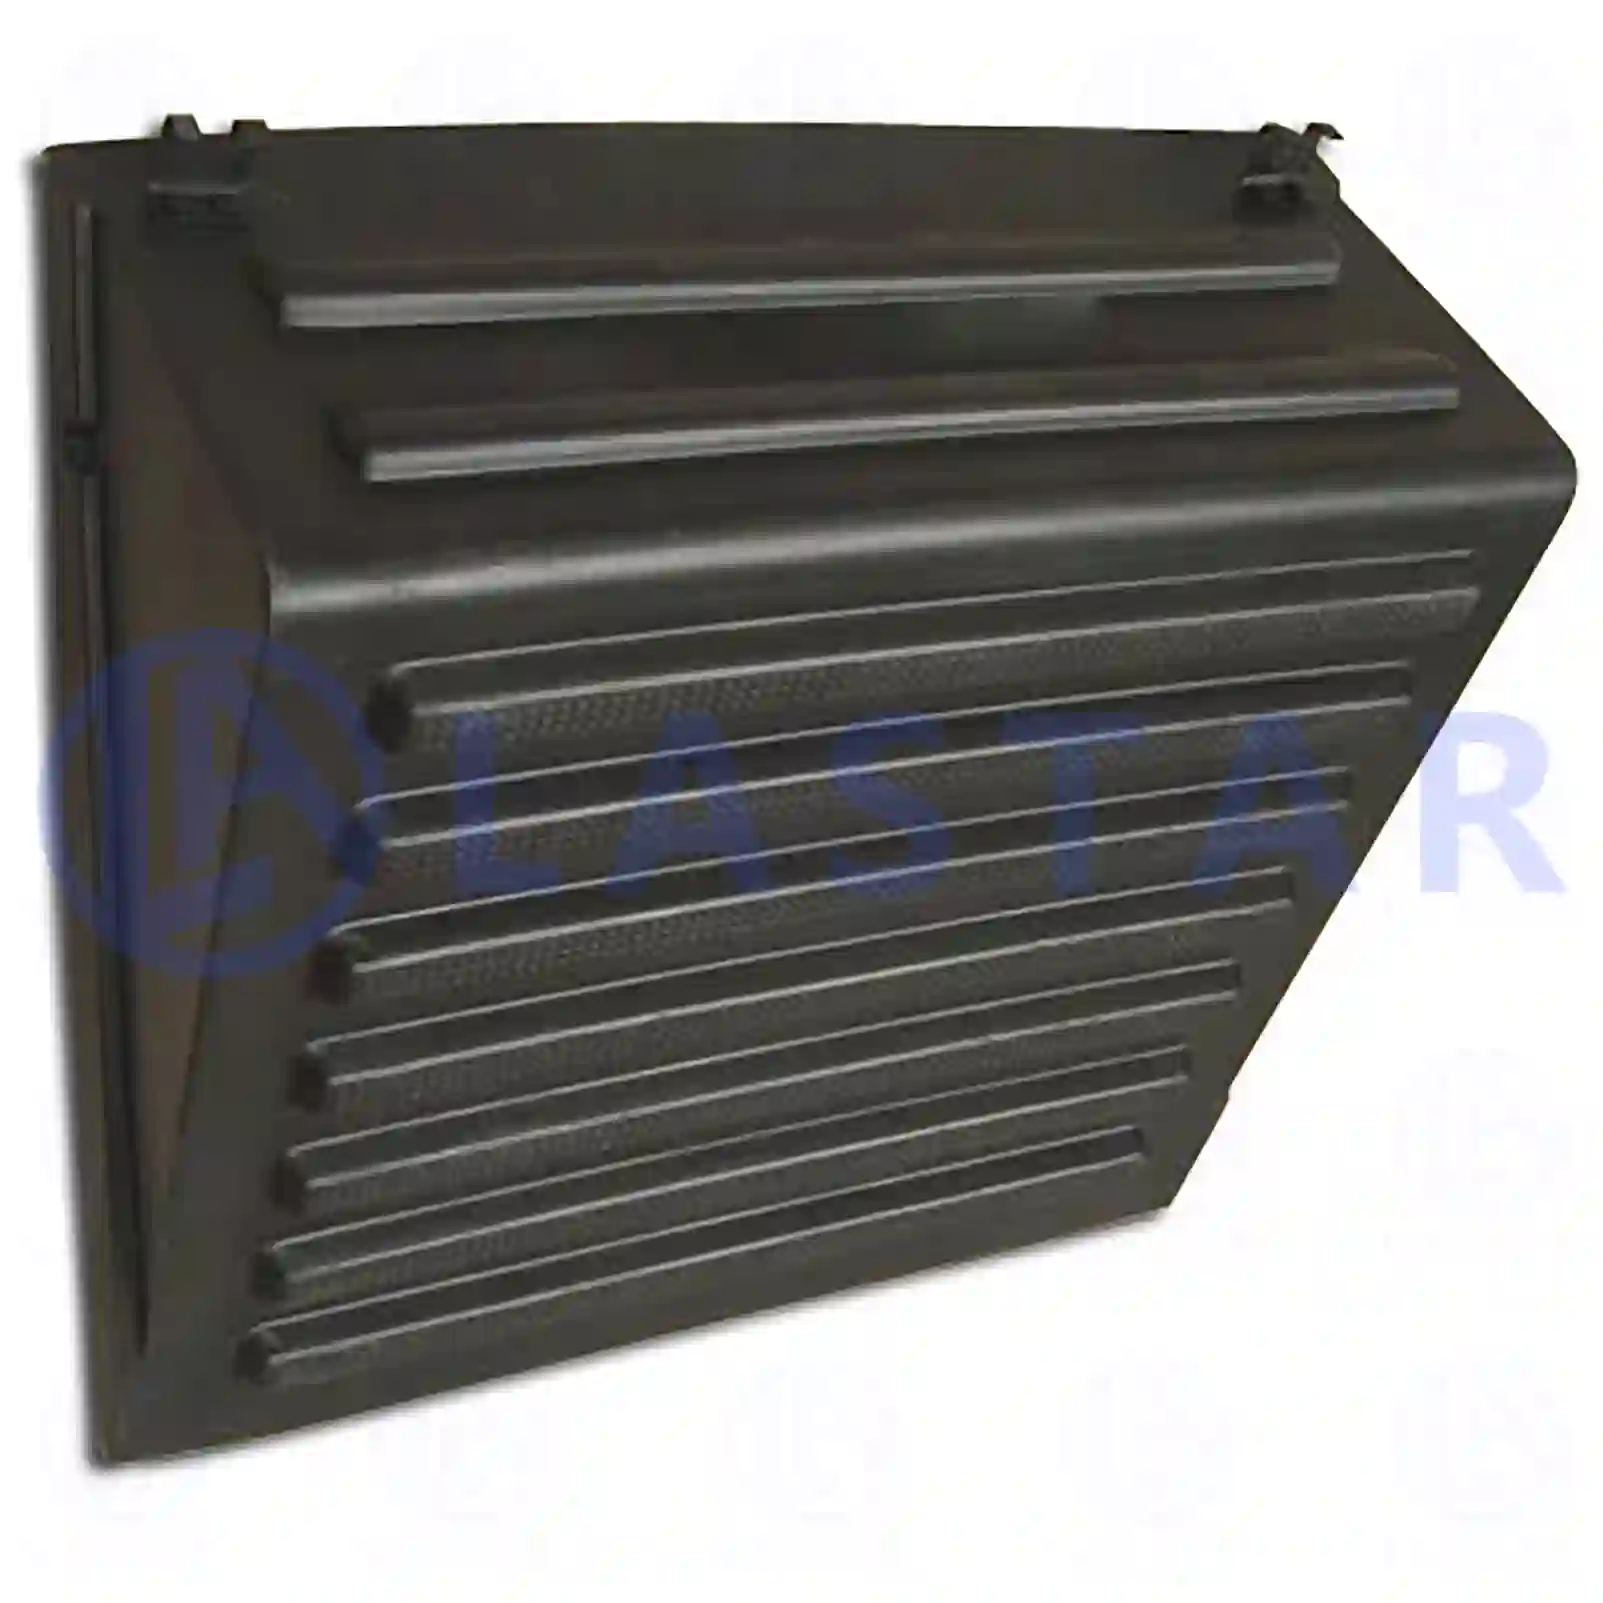 Battery cover, 77710077, 7420518311, 20507252, 20518311, 3127594, ZG60026-0008 ||  77710077 Lastar Spare Part | Truck Spare Parts, Auotomotive Spare Parts Battery cover, 77710077, 7420518311, 20507252, 20518311, 3127594, ZG60026-0008 ||  77710077 Lastar Spare Part | Truck Spare Parts, Auotomotive Spare Parts